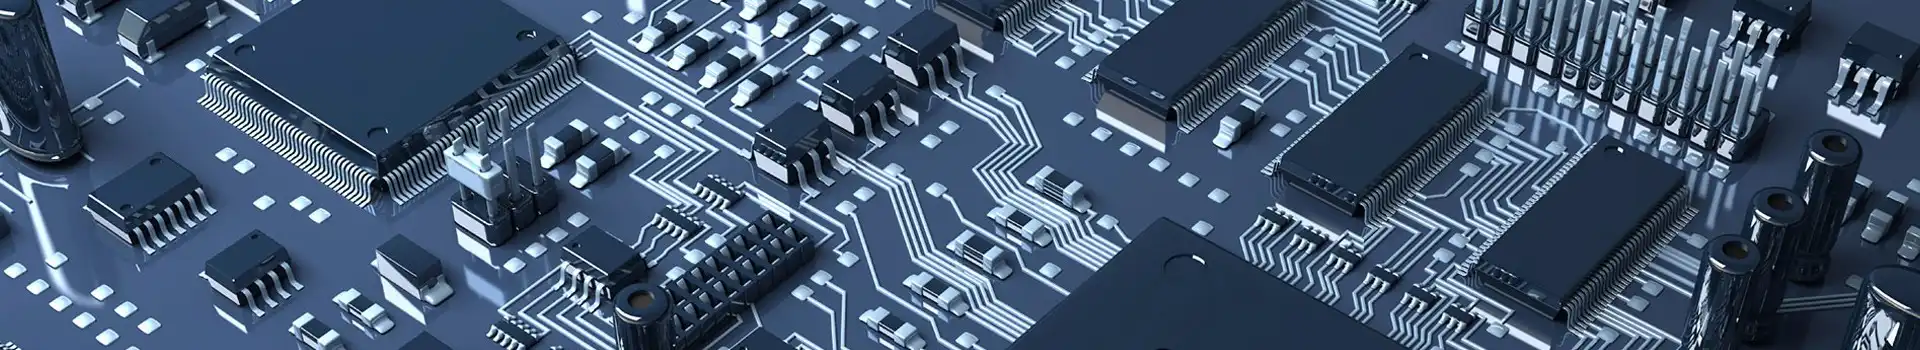 Features and Applications of Aluminum Printed Circuit Boards